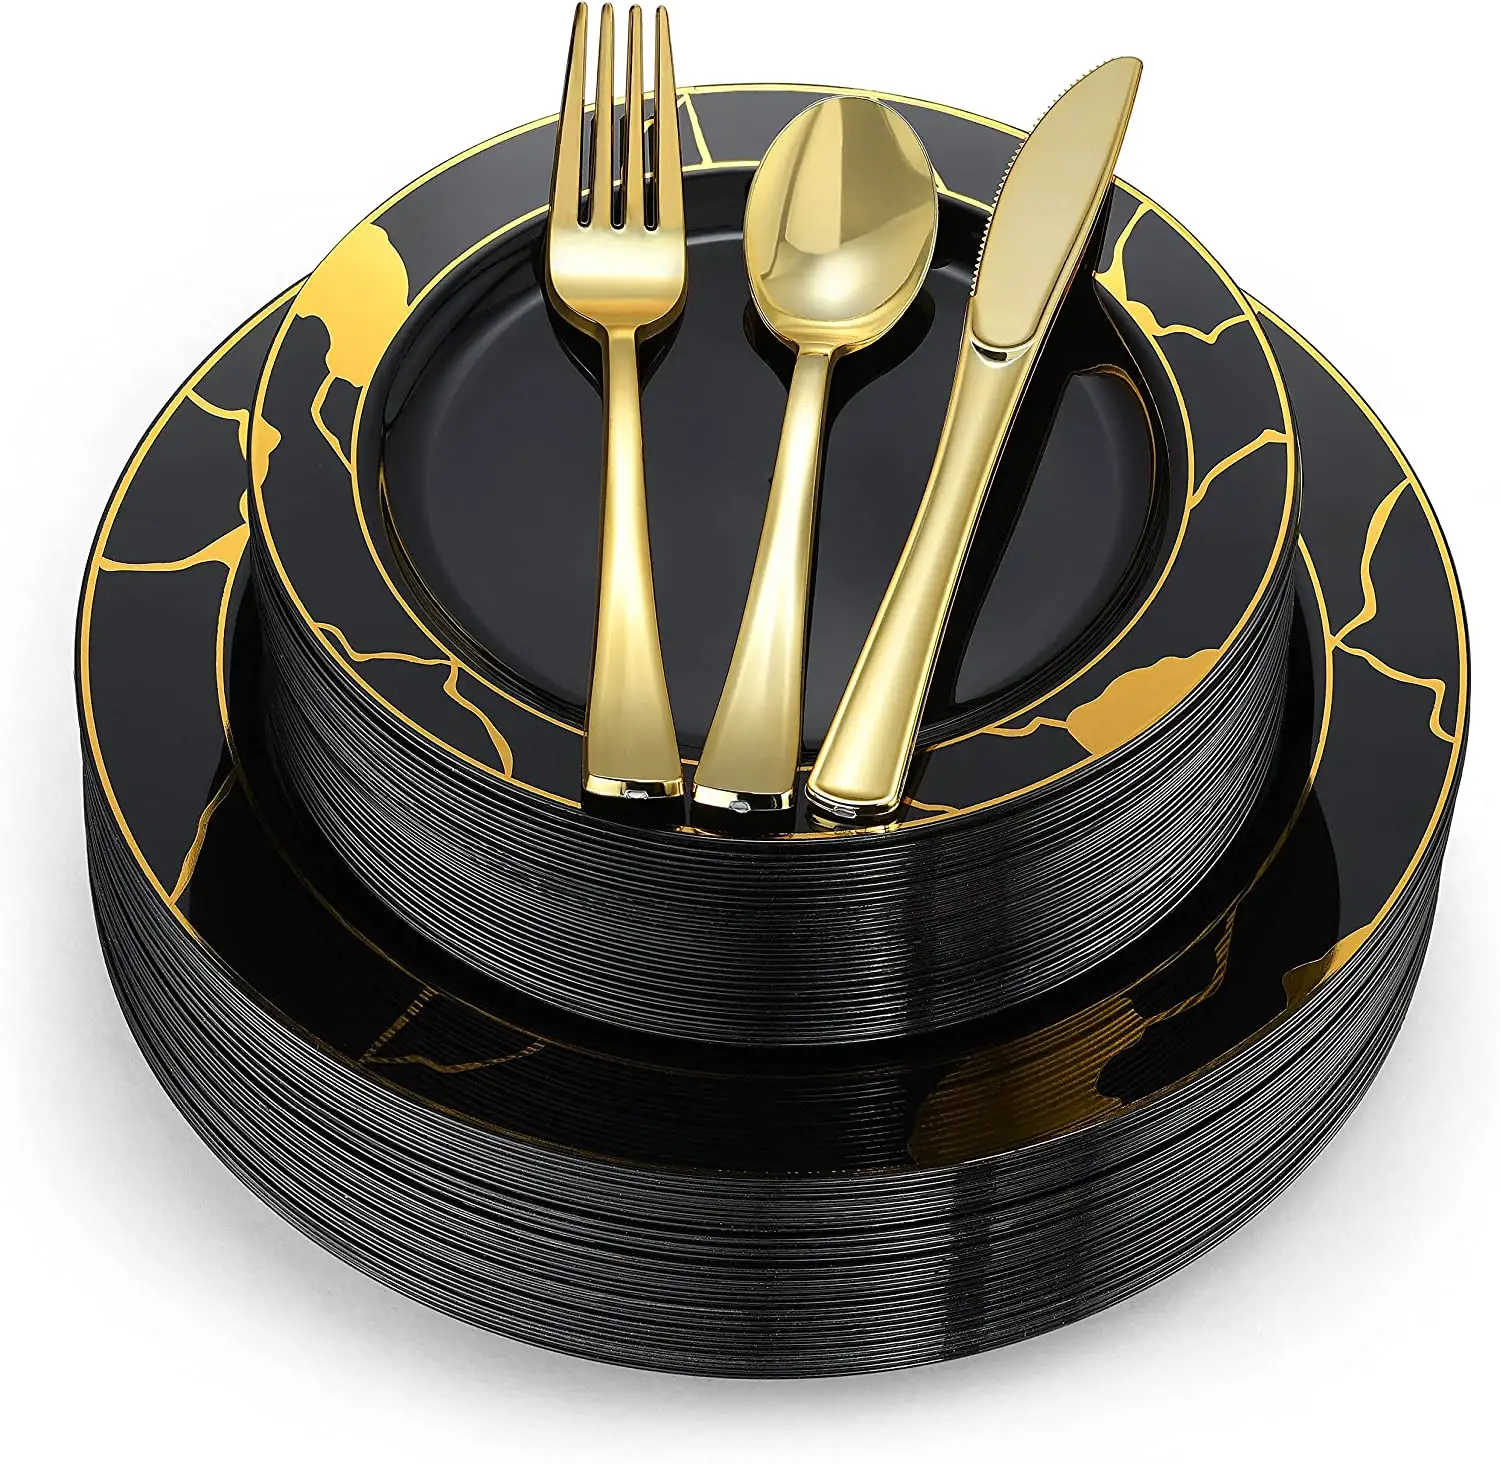 Black and Gold Plates Plastic Dinnerware Sets Plates with Plastic Silverware Forks Spoons Knives cups and napkins